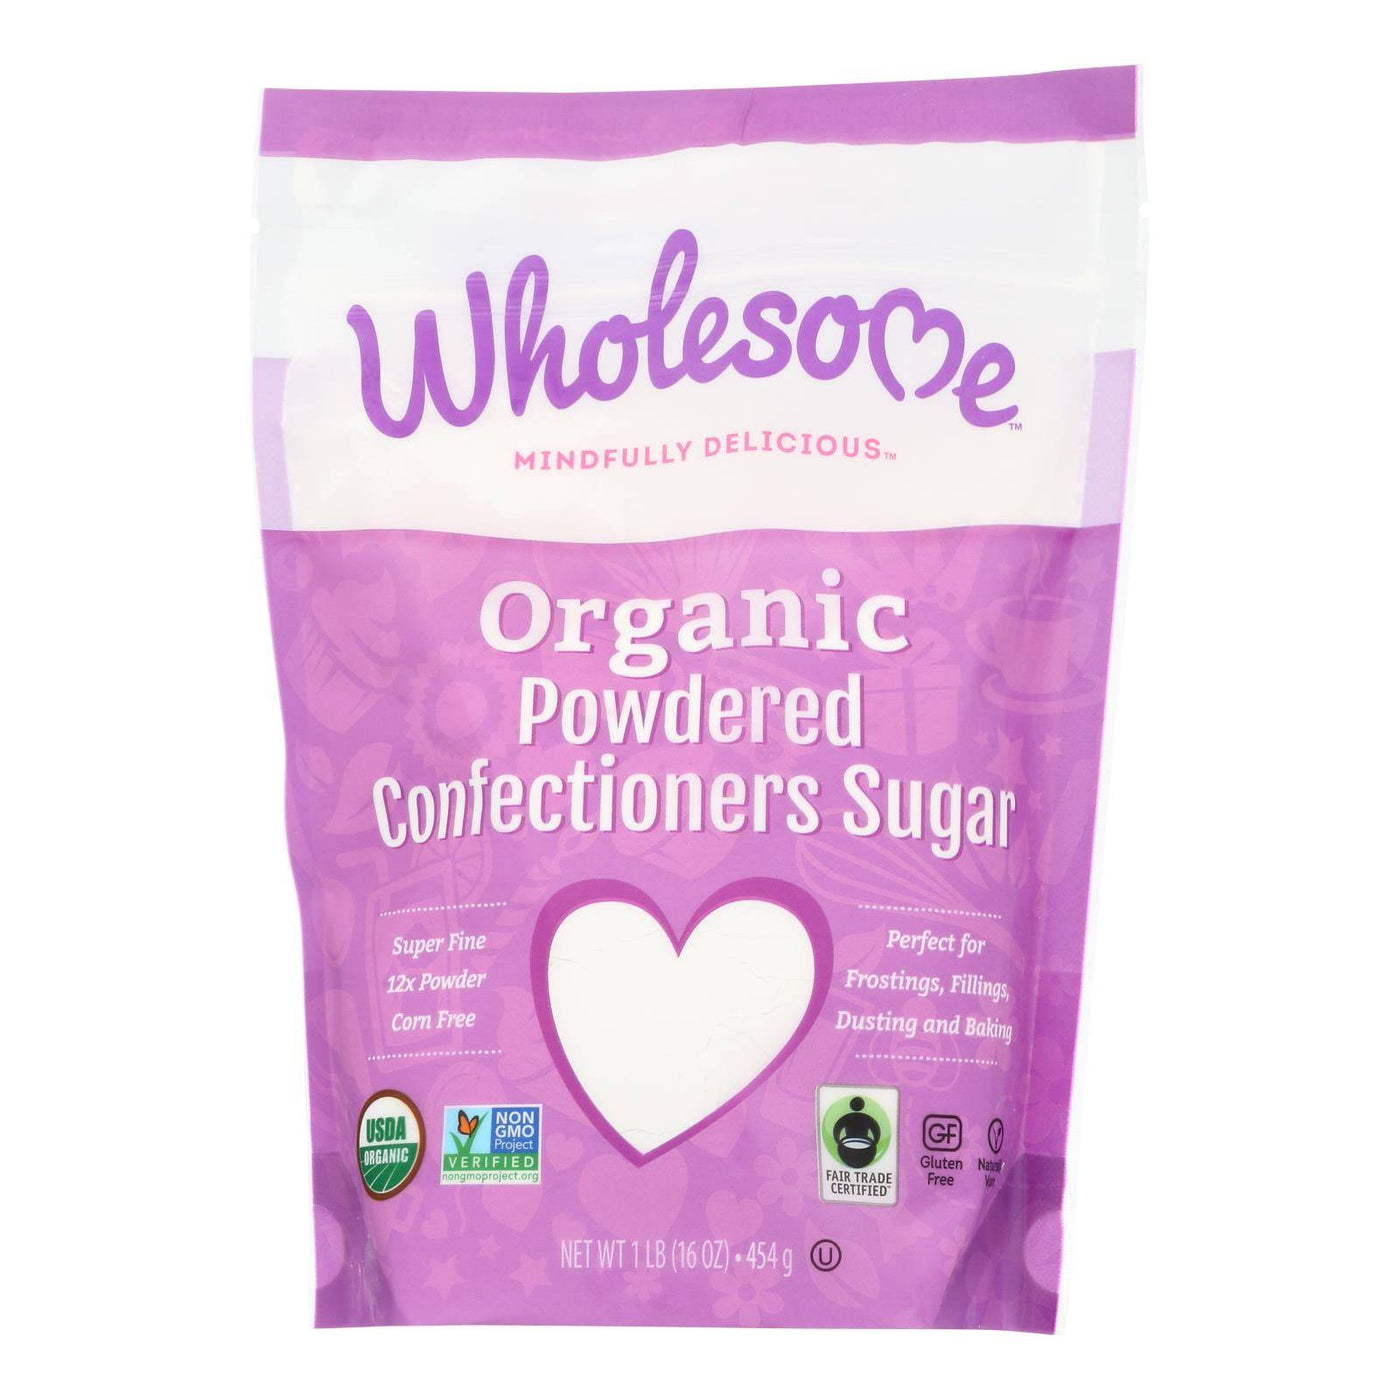 Wholesome Sweeteners Powdered Sugar - Organic And Natural - Case Of 6 Lbs | OnlyNaturals.us